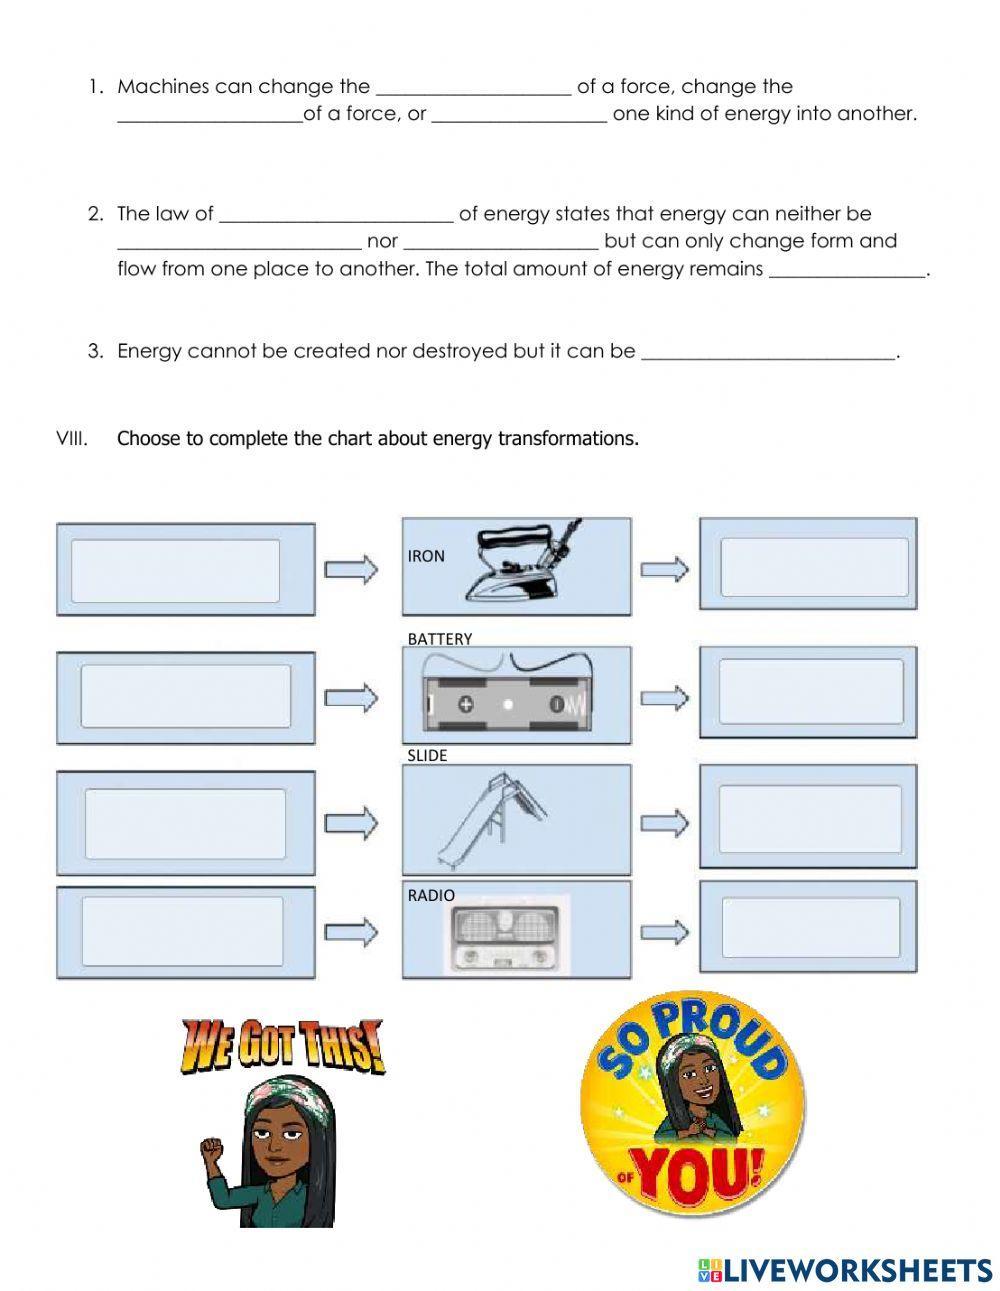 6TH GRADE SCIENCE TEST T3 PART 2